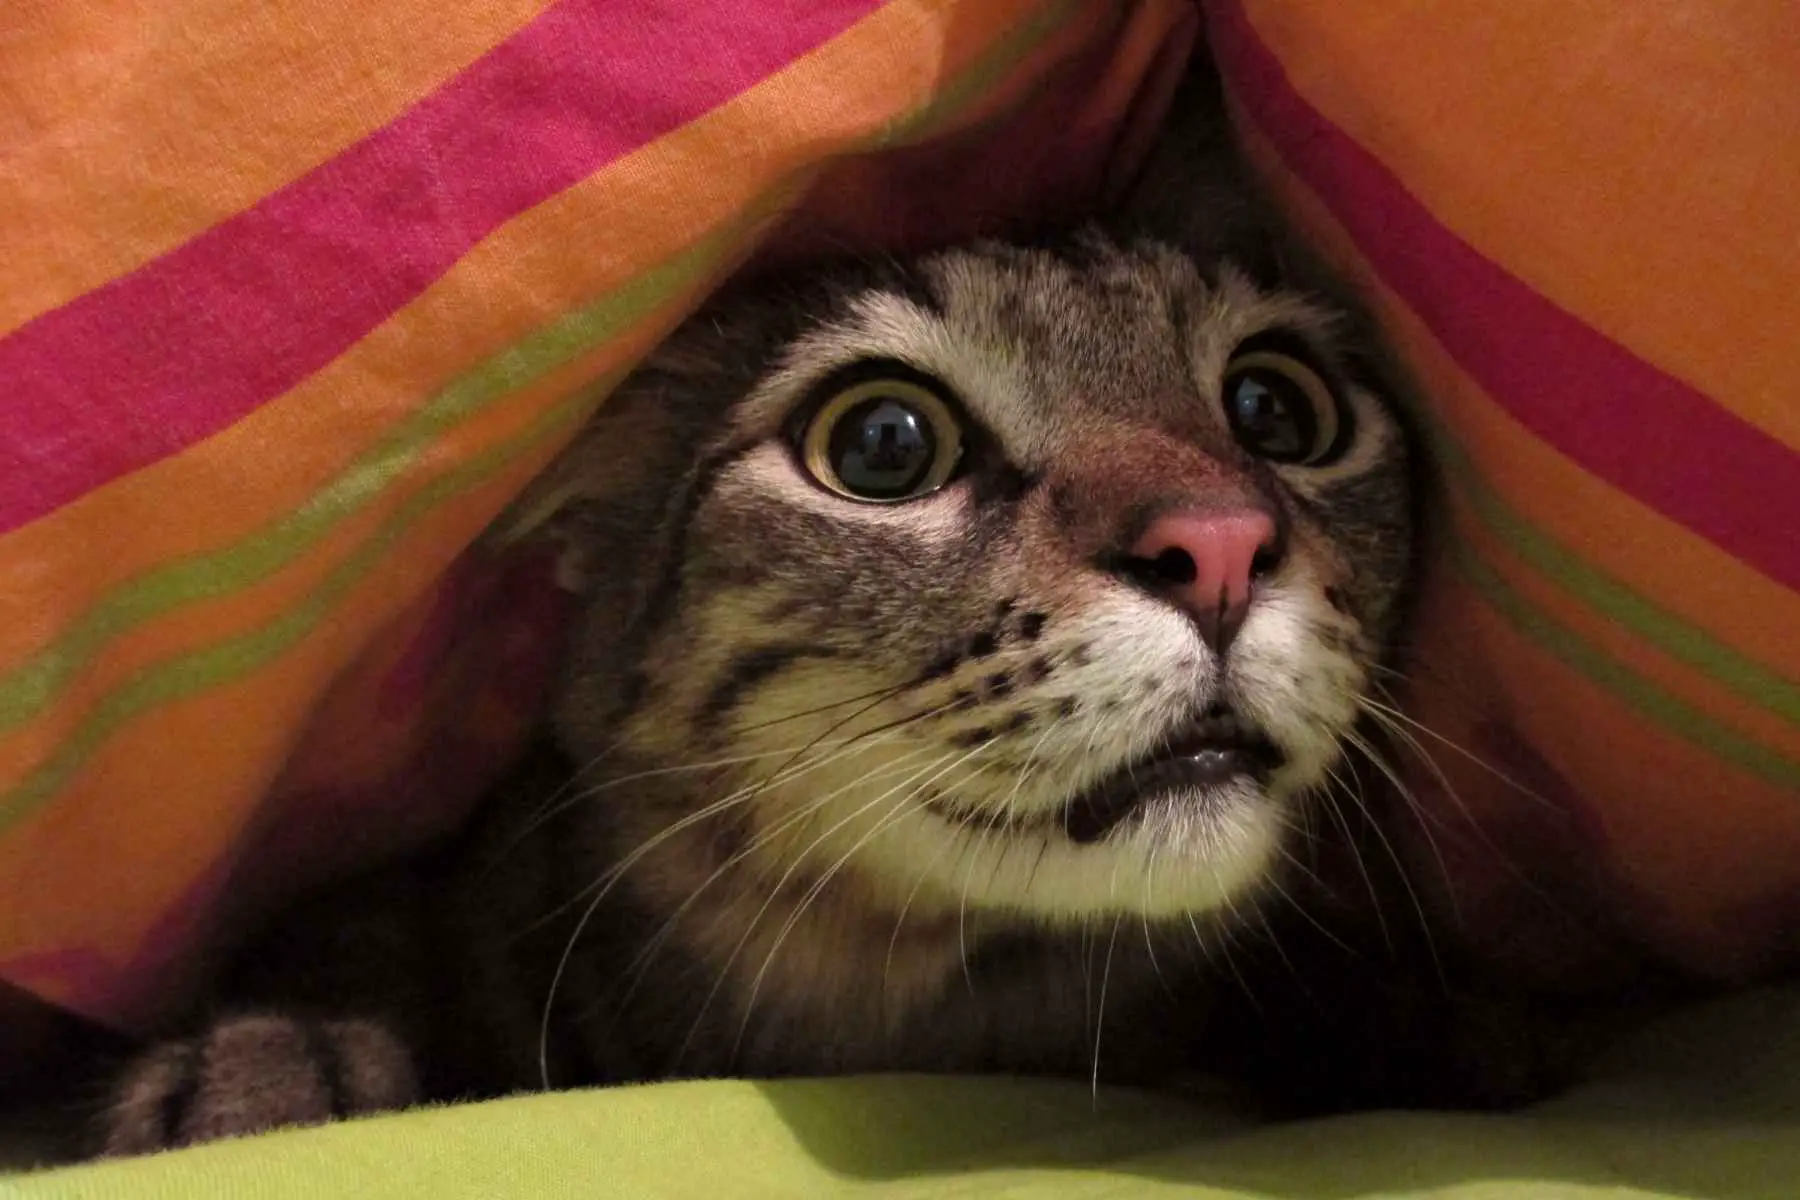 Scared cat under a blanket